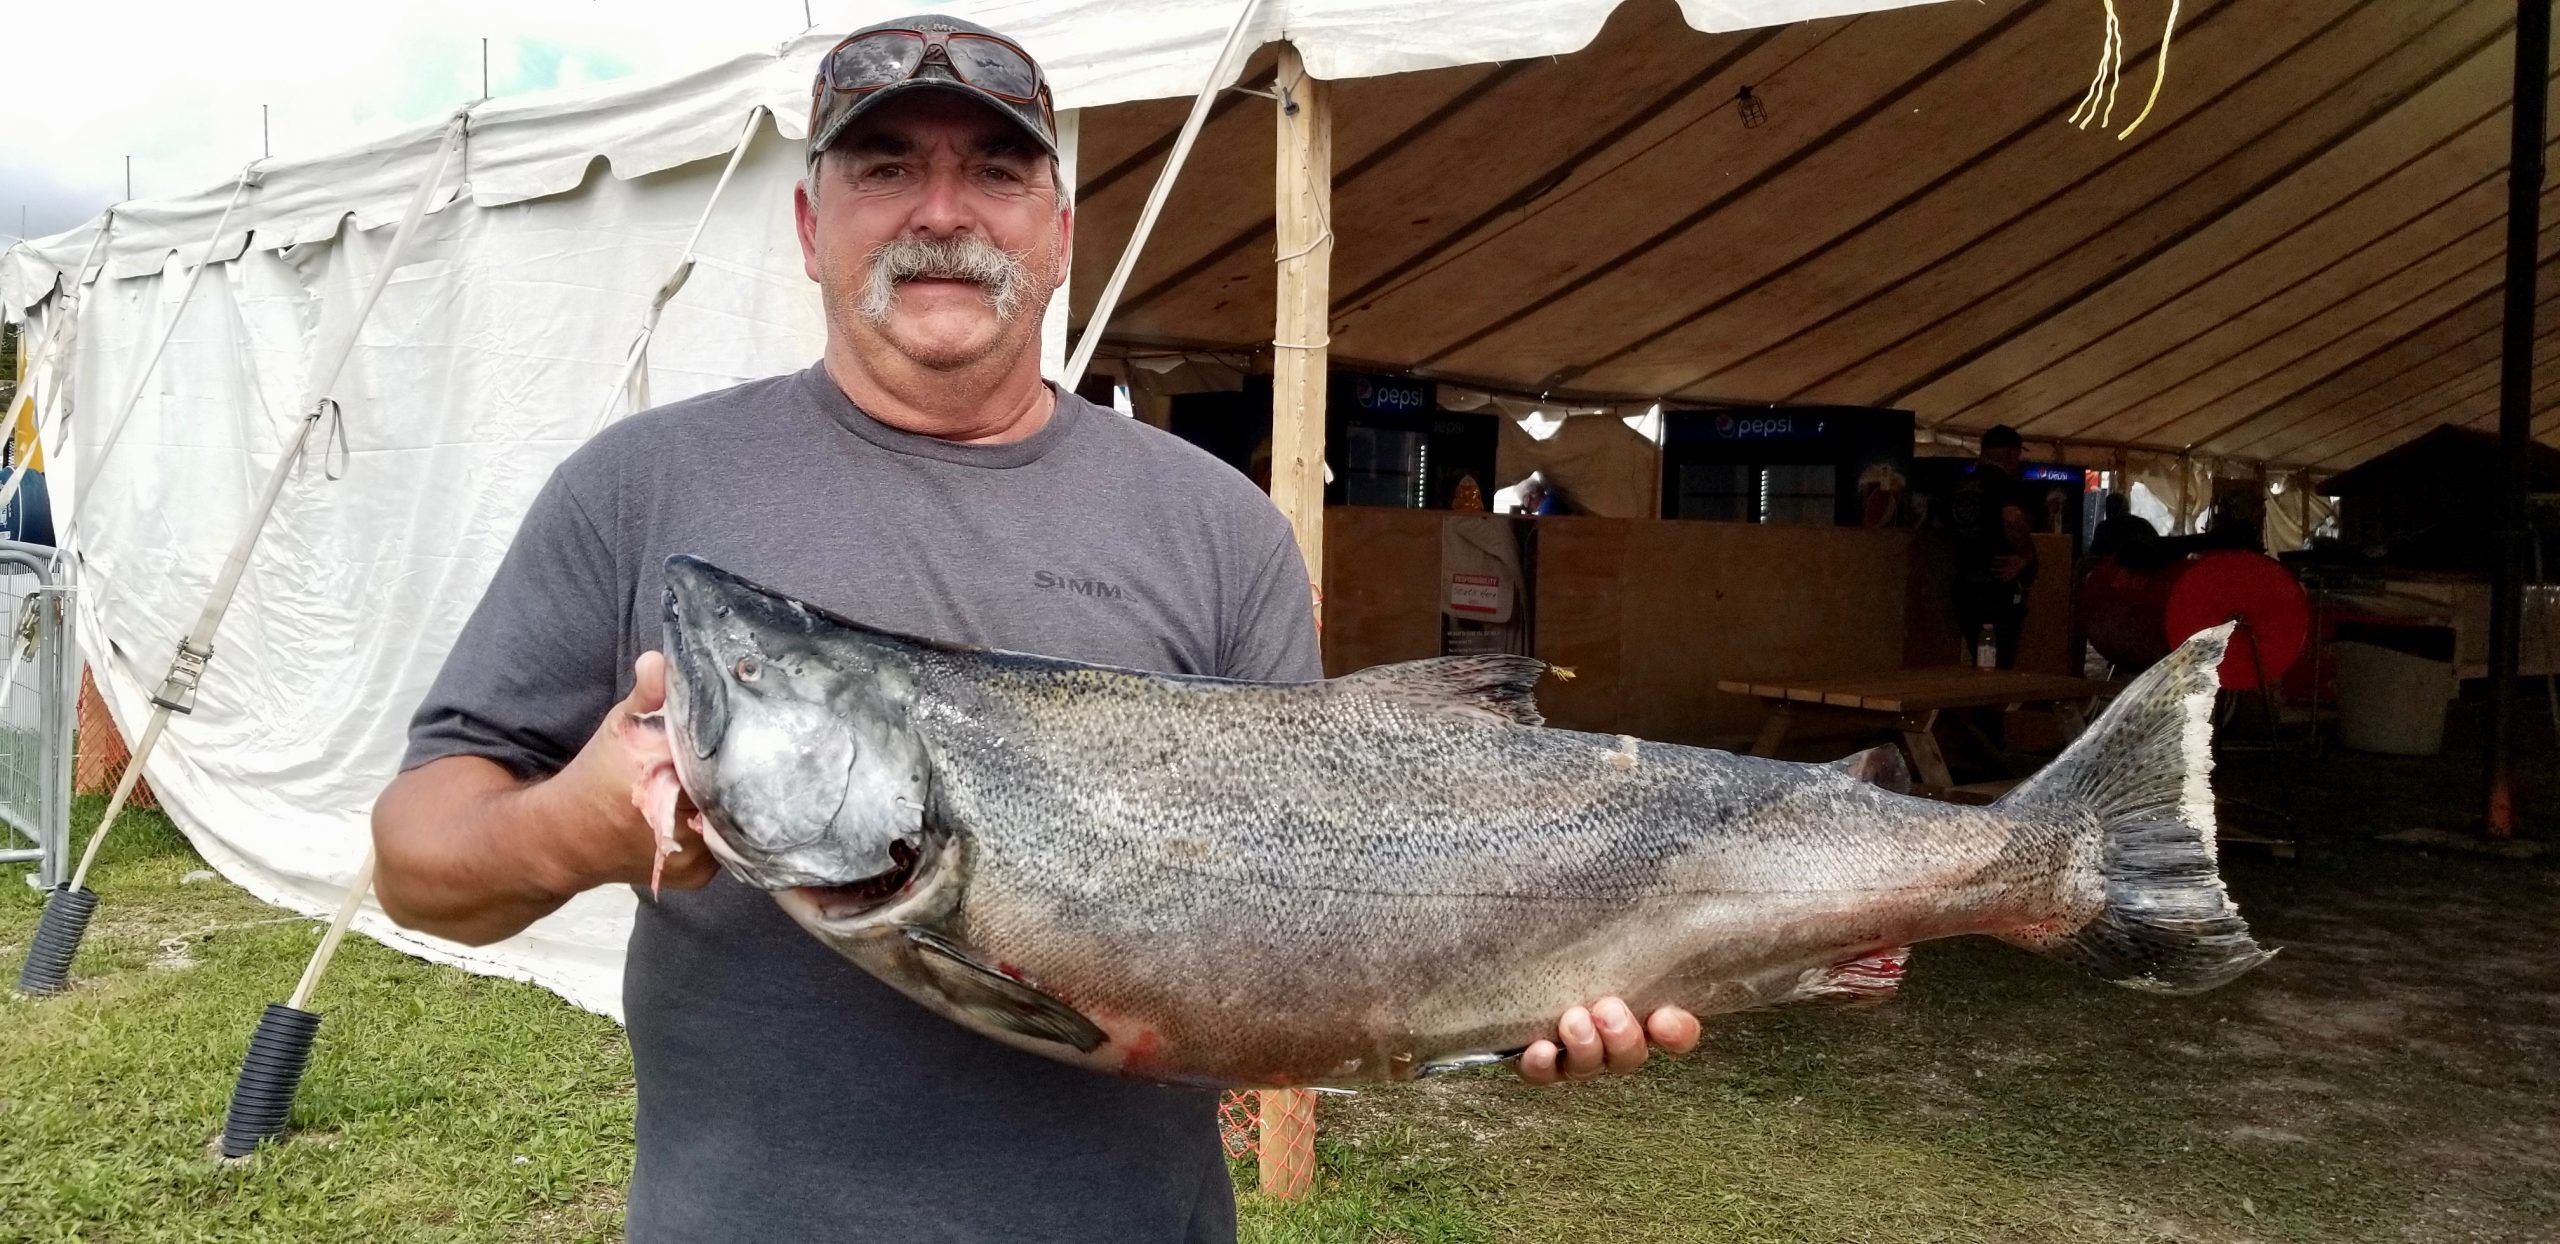 Salmon Spectacular had 'less bustle' but still got people excited